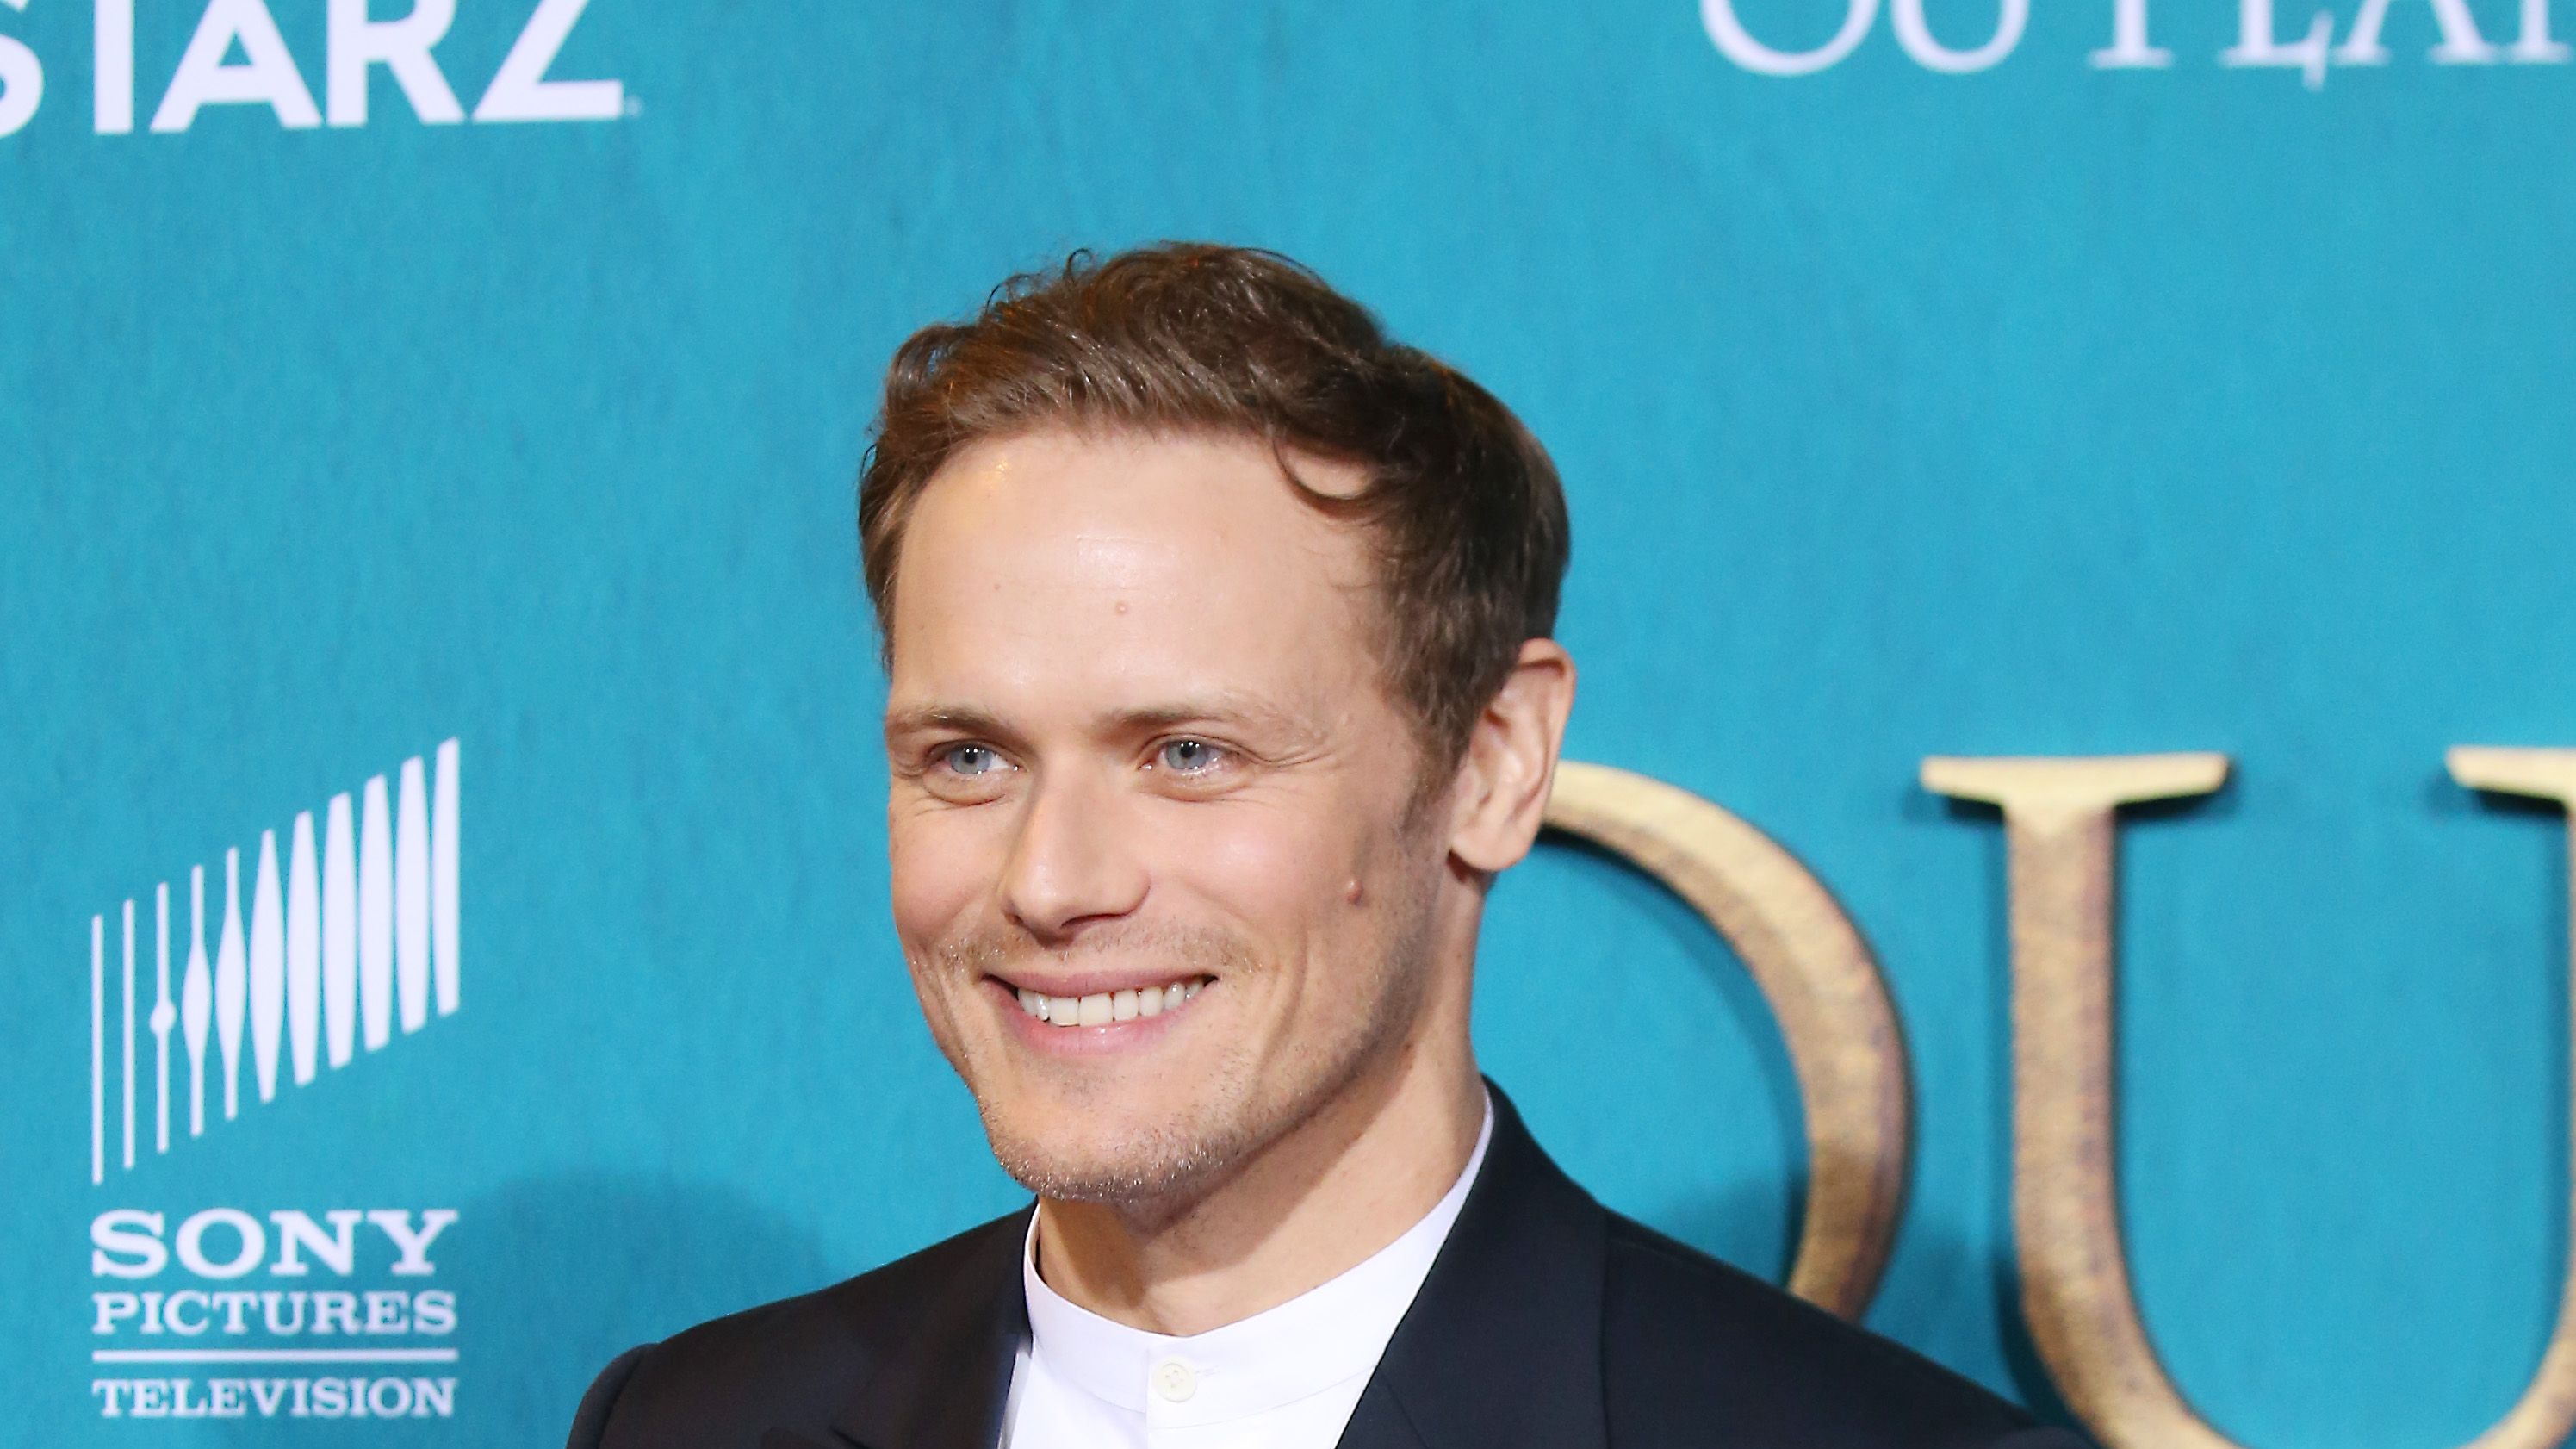 on　Freaking　Heughan's　Won't　Fans　Outlander'　Stop　News　Sam　Out　Incredible　Over　Instagram